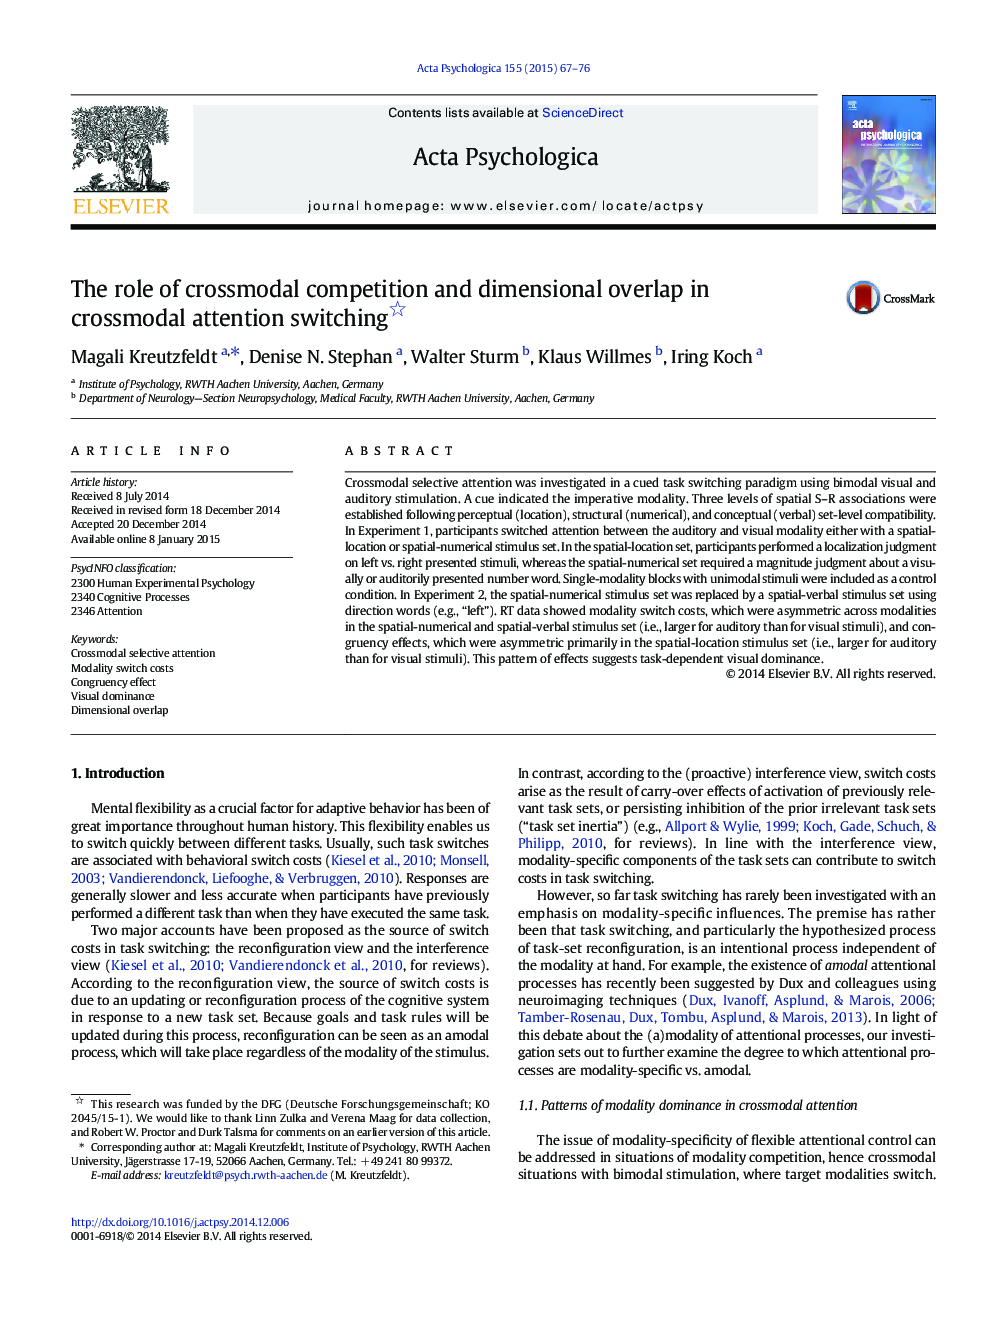 The role of crossmodal competition and dimensional overlap in crossmodal attention switching